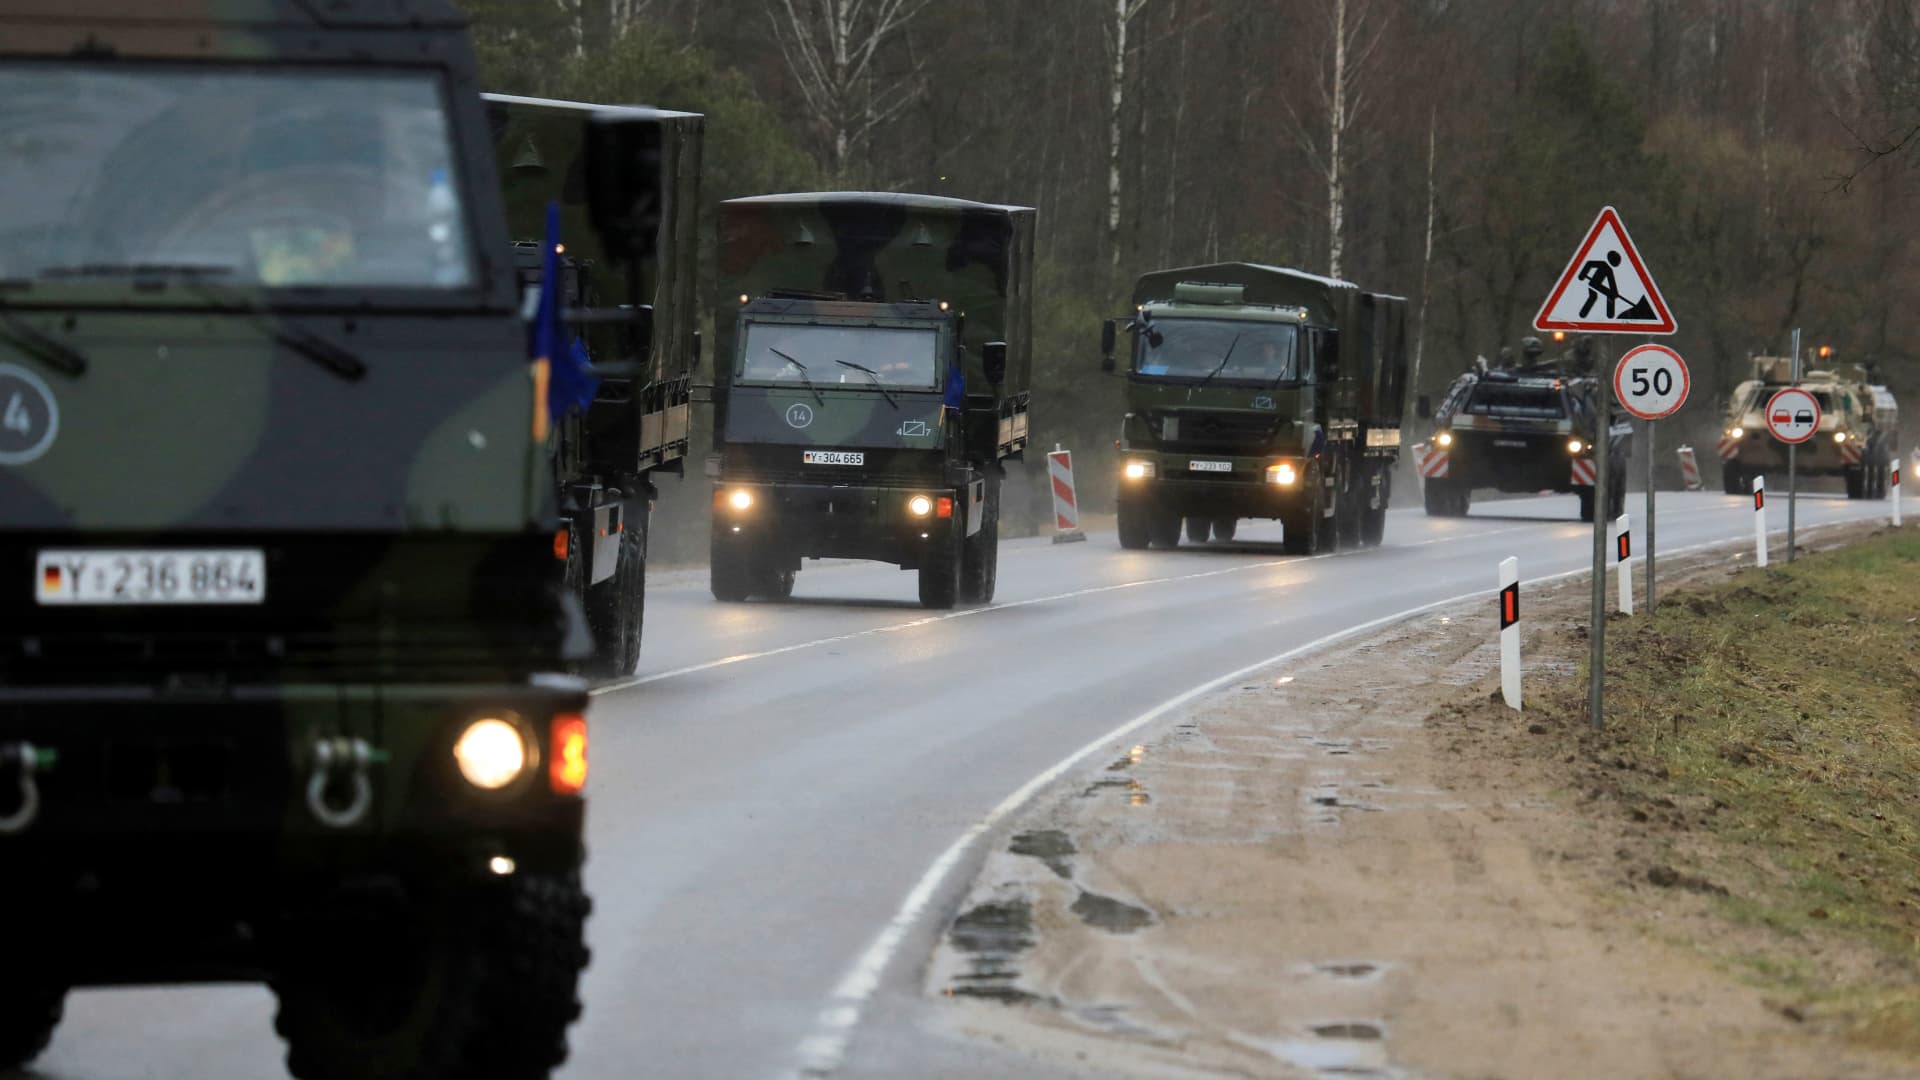 Vehicles of the German armed forces Bundeswehr from the Griffin barracks arrive at the NATO enhanced Forward Presence Battle Group Battalion in Lithuania in Rukla, Lithuania on February 17, 2022.